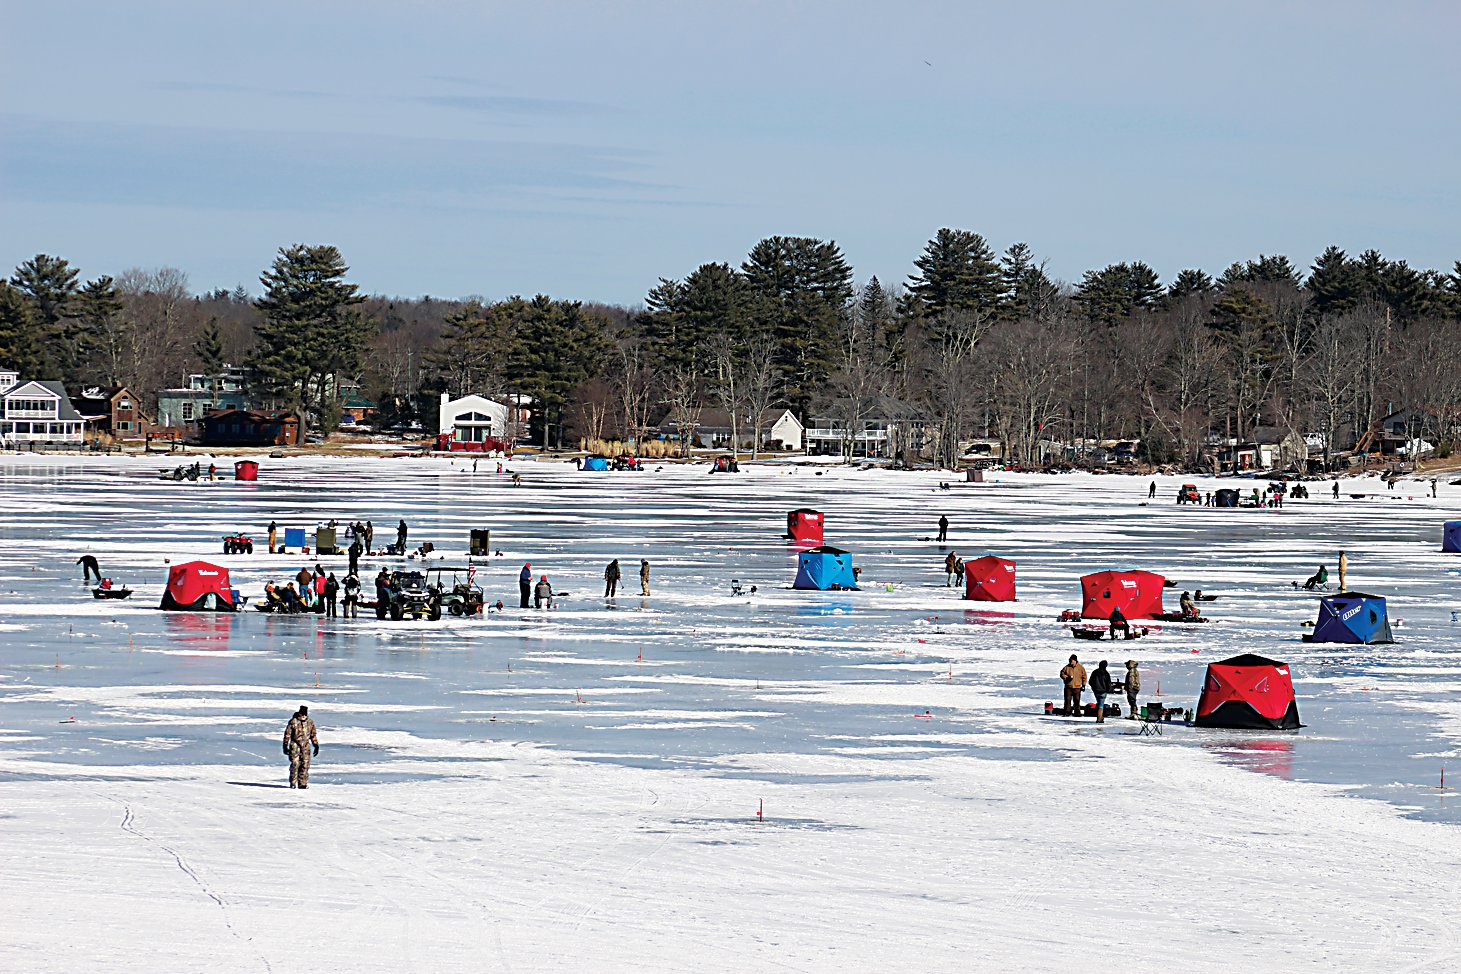 Participants in the annual King of the Ice fishing tournament were spread out across White Lake on Sunday.